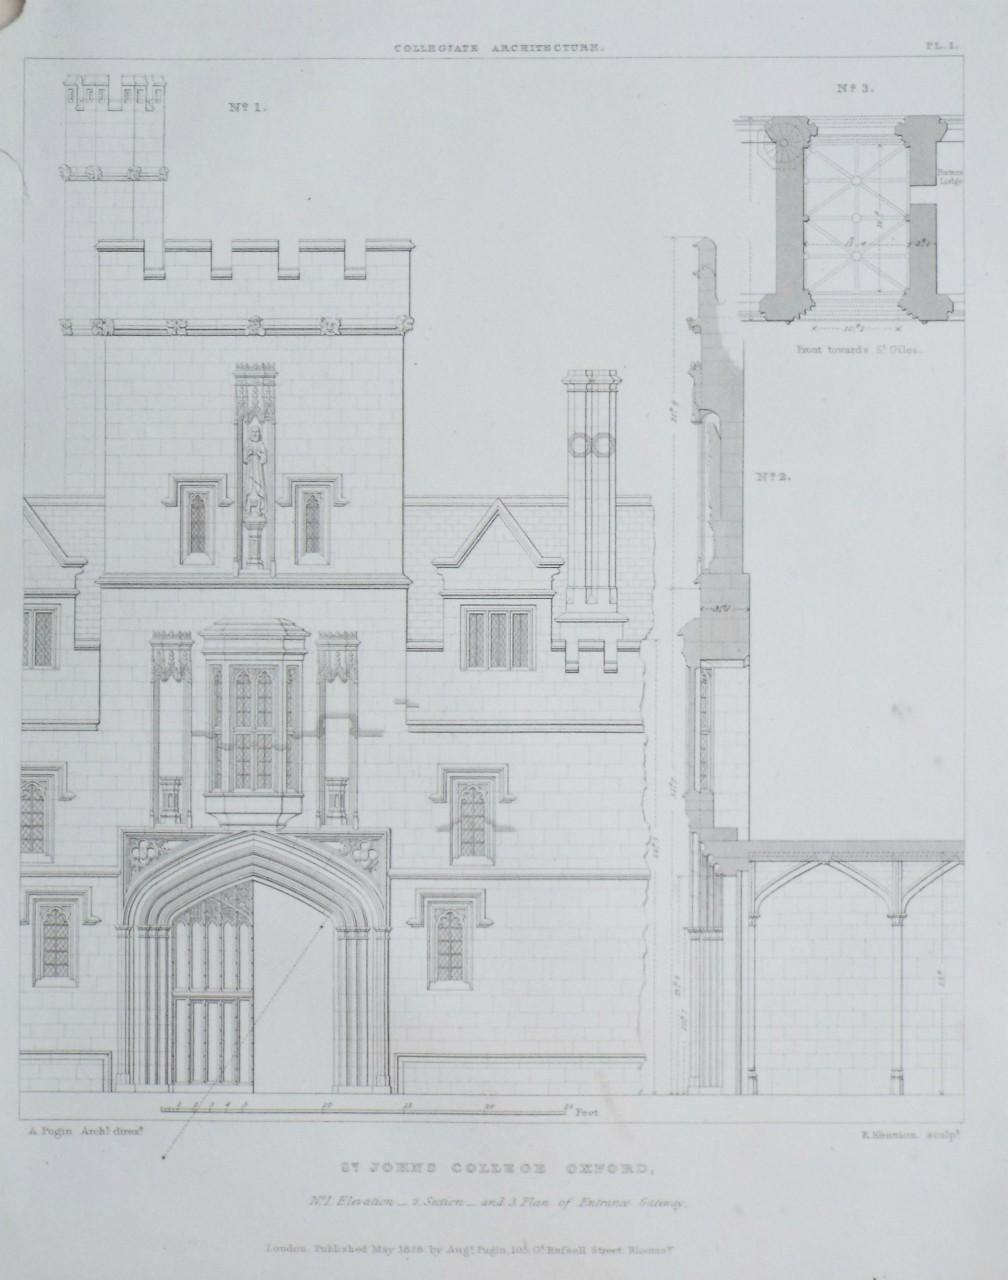 Print - St. Johns College, Oxford, No. 1 Elevation - 2. Section - and 3. Plan of Entrance Gateway.Centre & adjoining Compartment of Cloisters. - Kennion